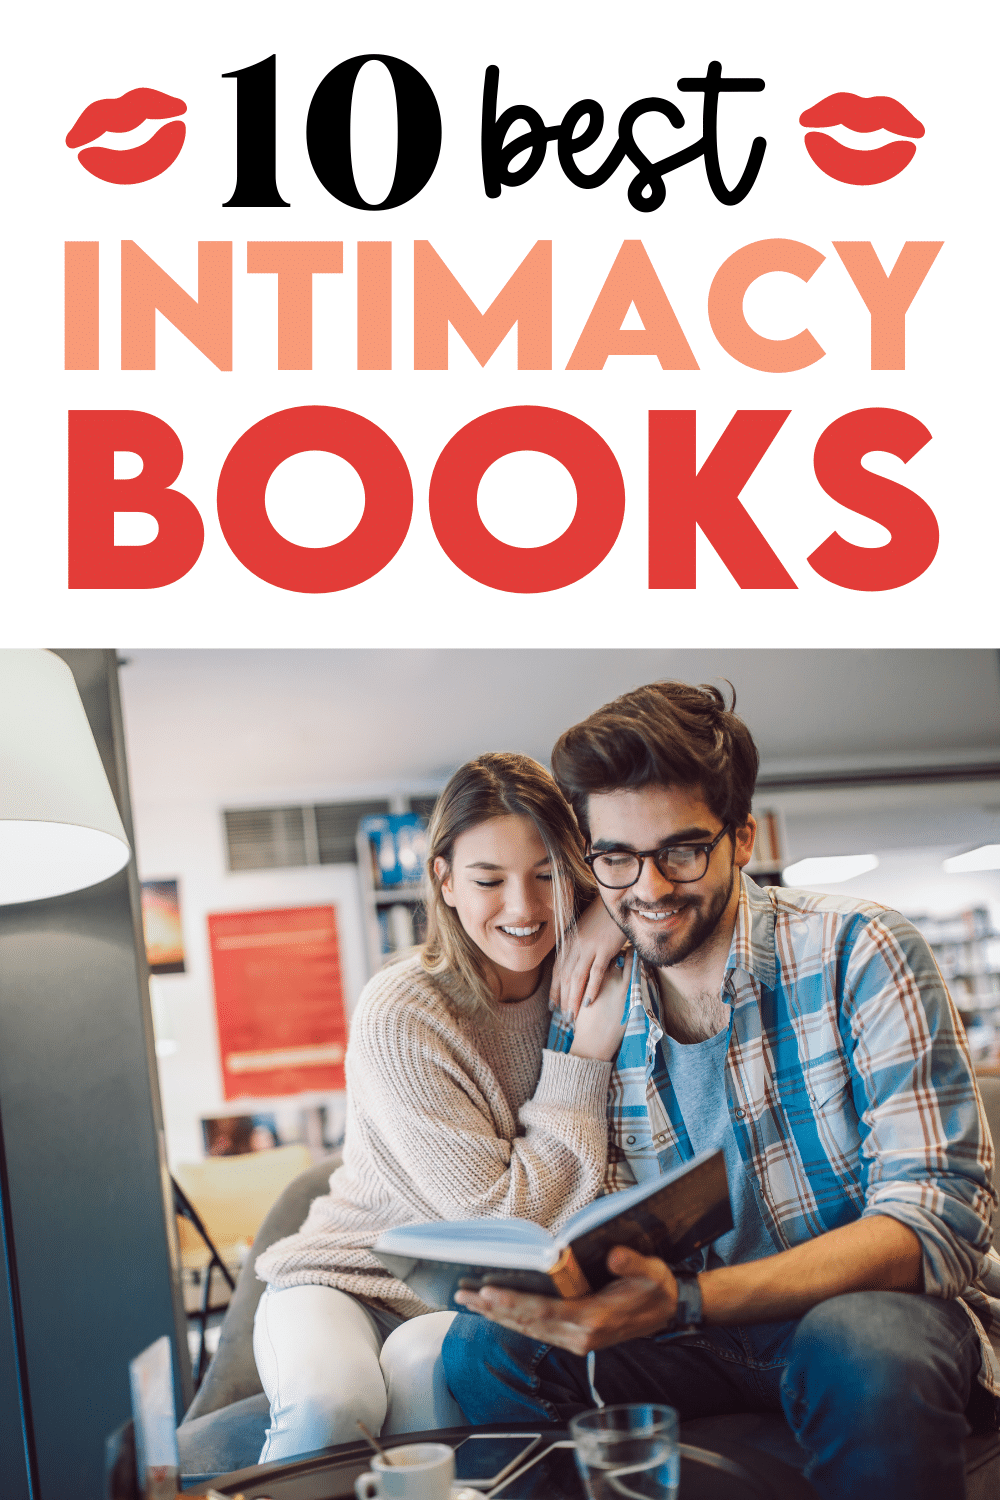 sex therapy books for married couples